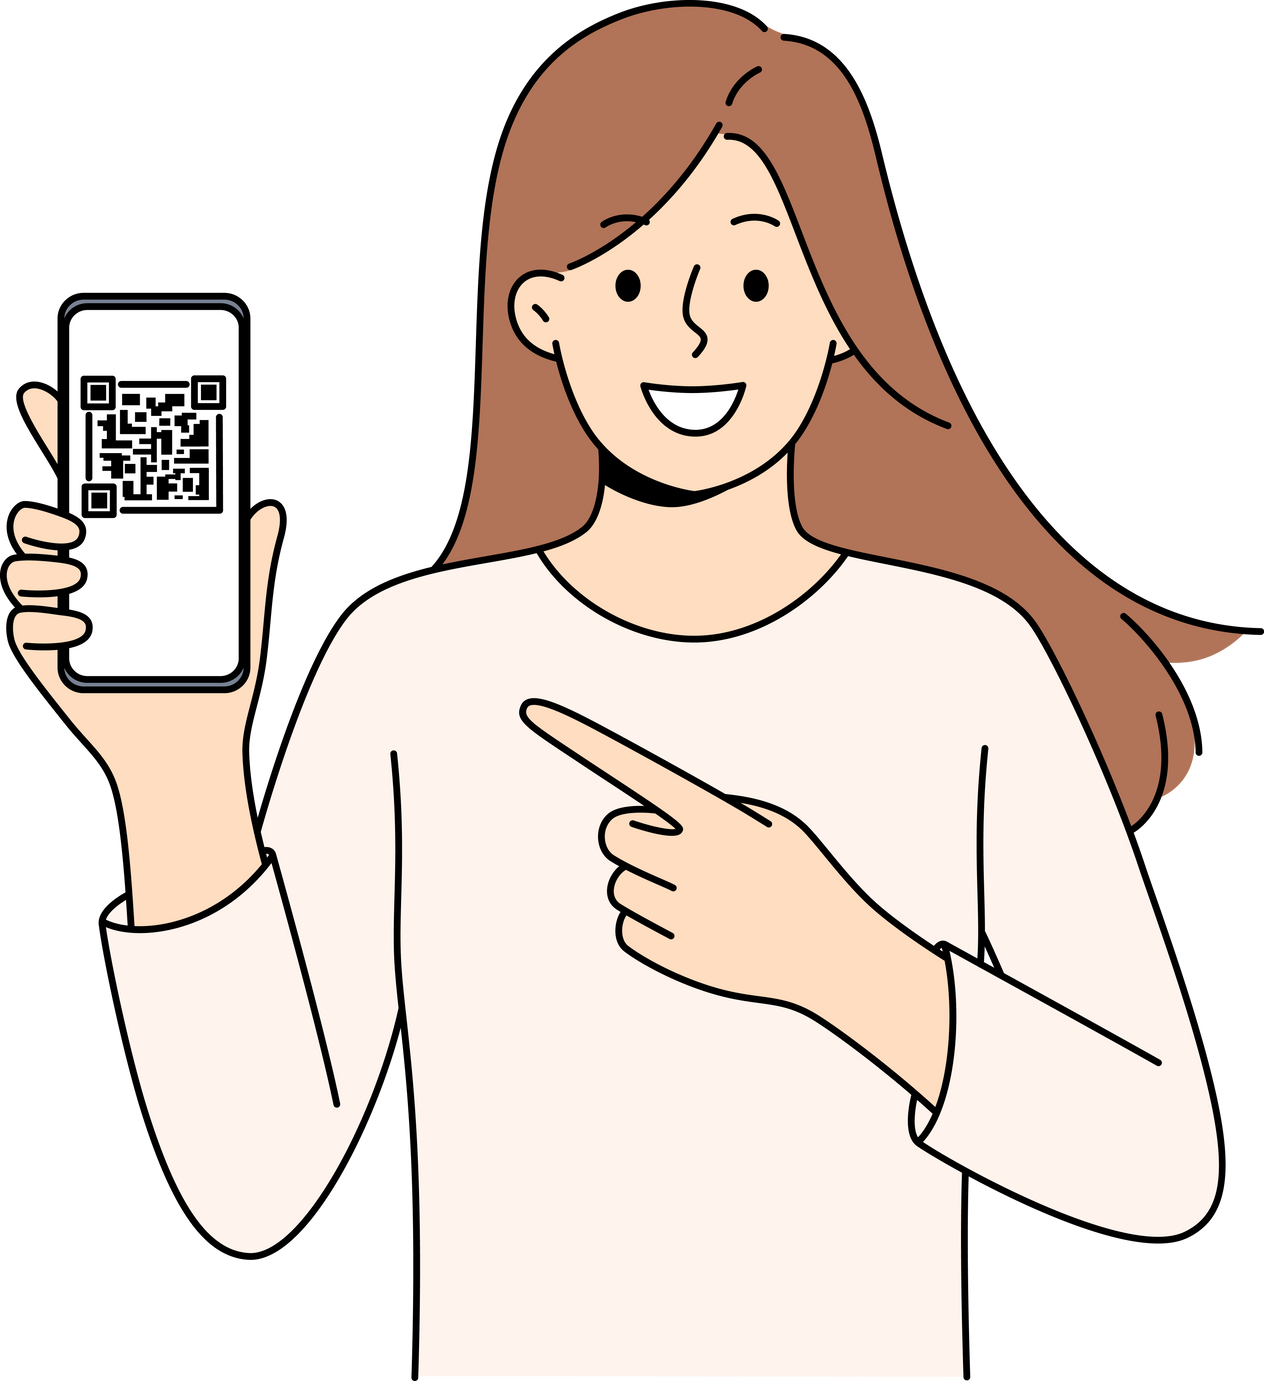 Woman holds phone demonstrating QR code for exchanging contacts or confirming online money transfer.